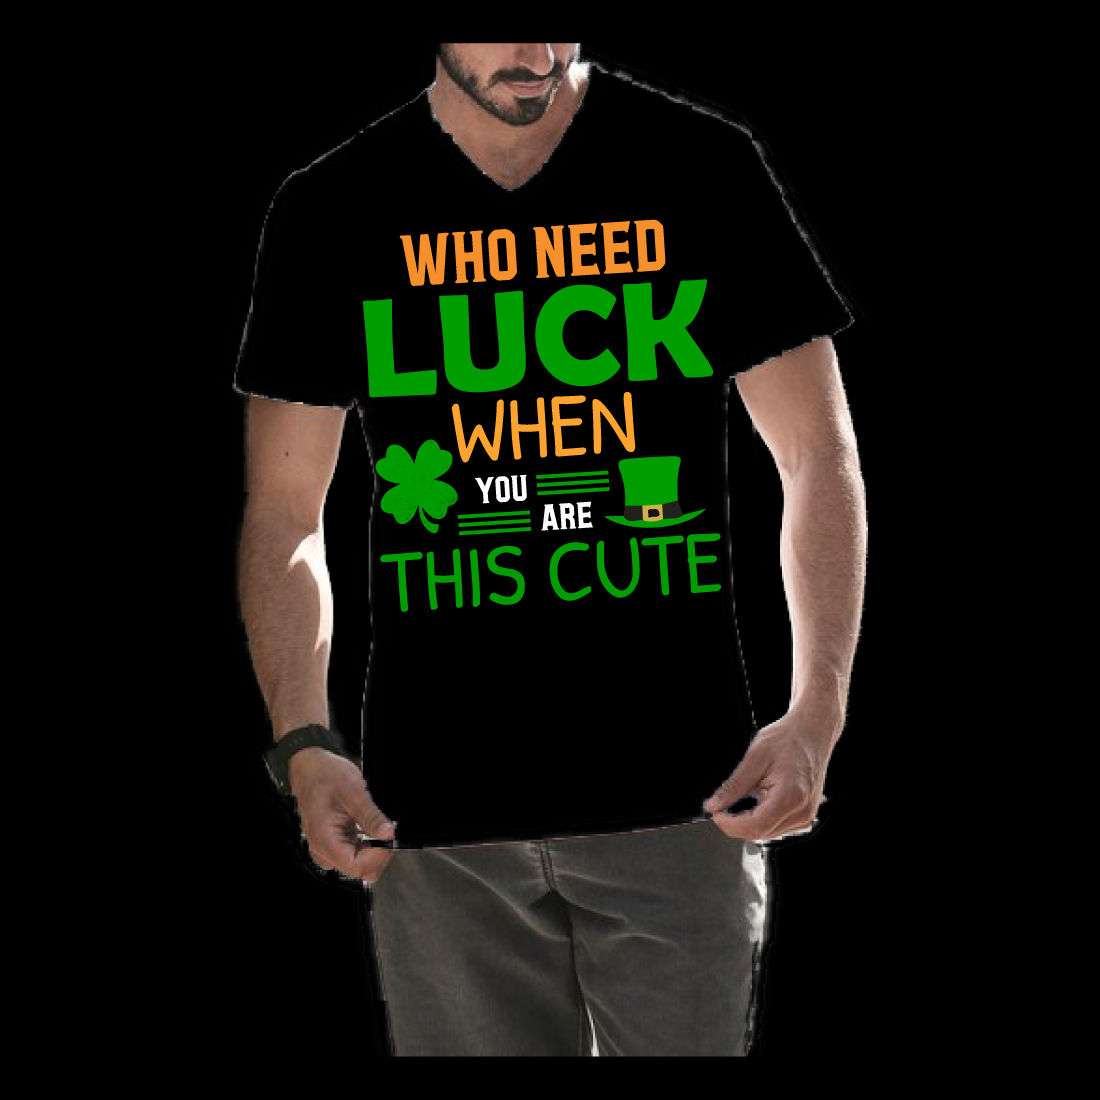 Man wearing a black shirt that says who need luck when you are this cute.